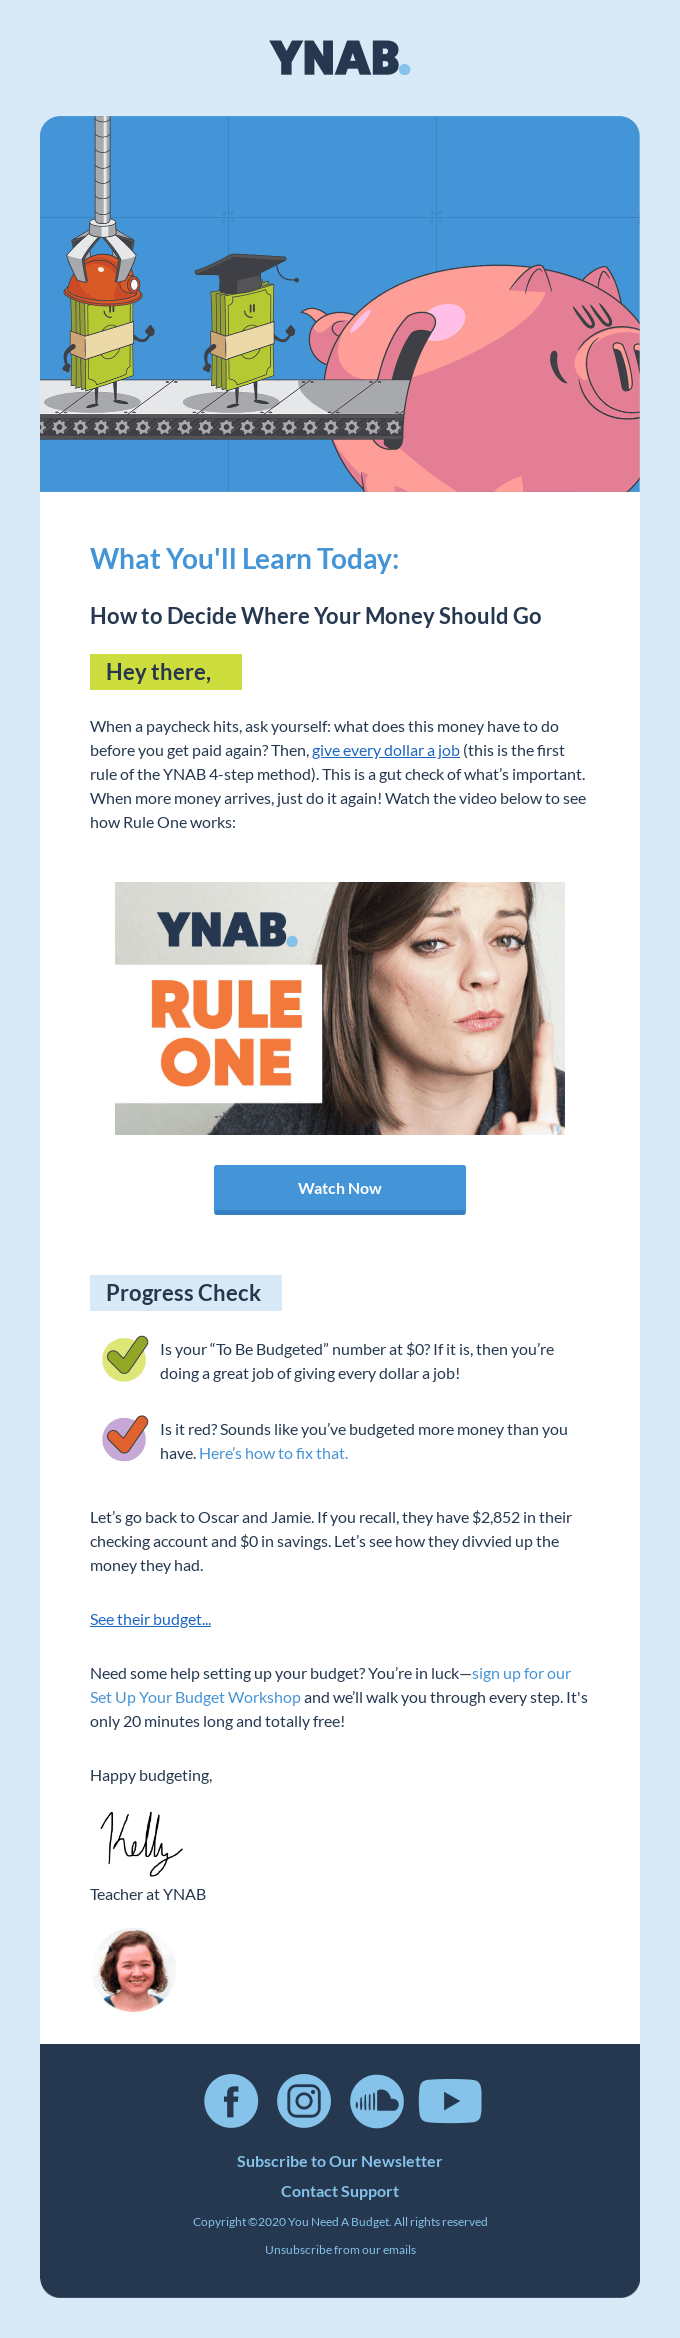 YNAB email offering money and budgeting education